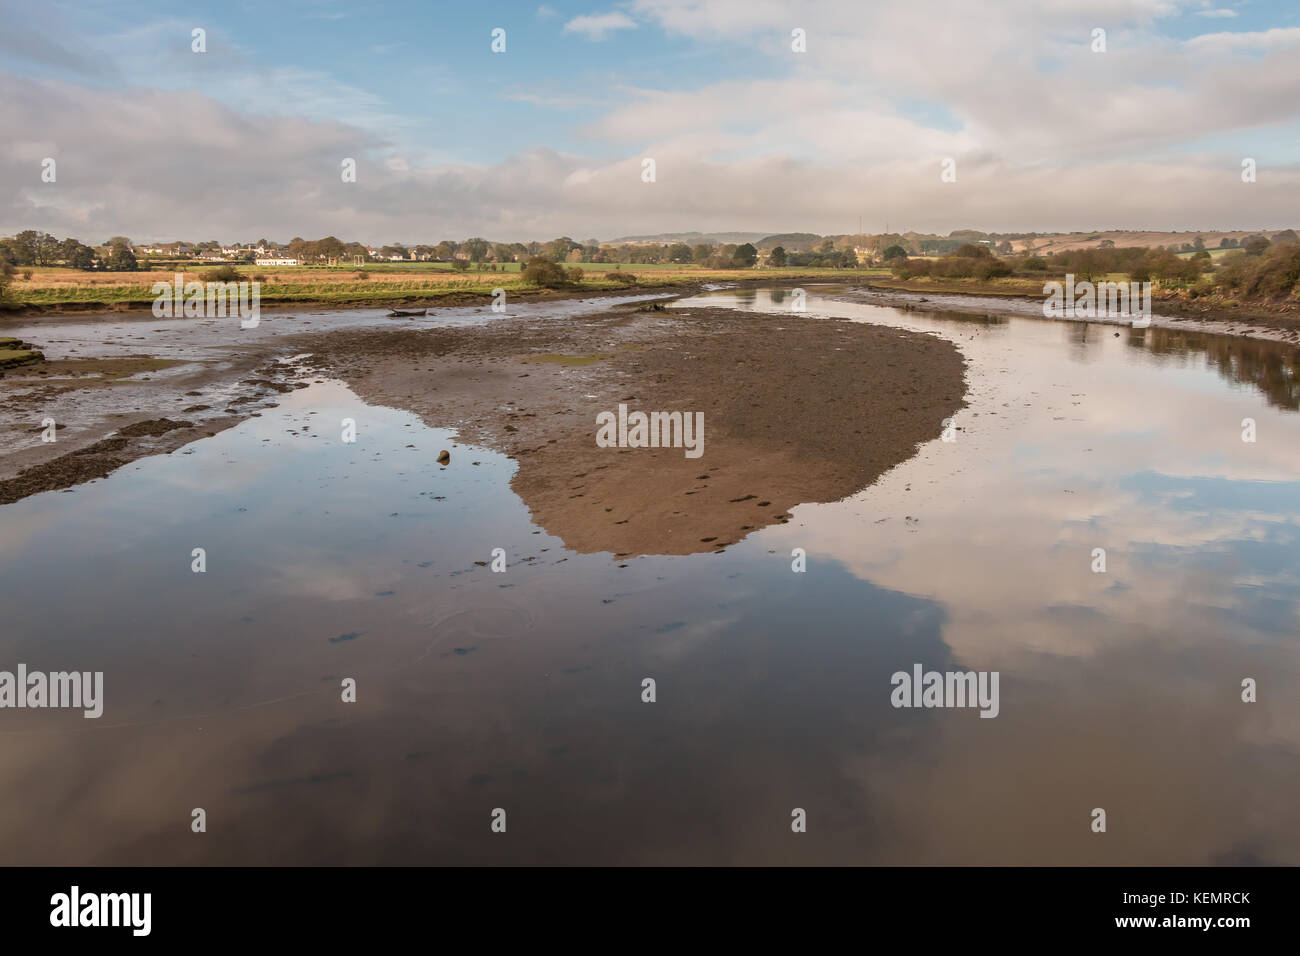 View of the river Aln estuary at low tide on a late autumn afternoon, taken from the Duchess bridge, Alnmouth, Northumberland.with copy space Stock Photo